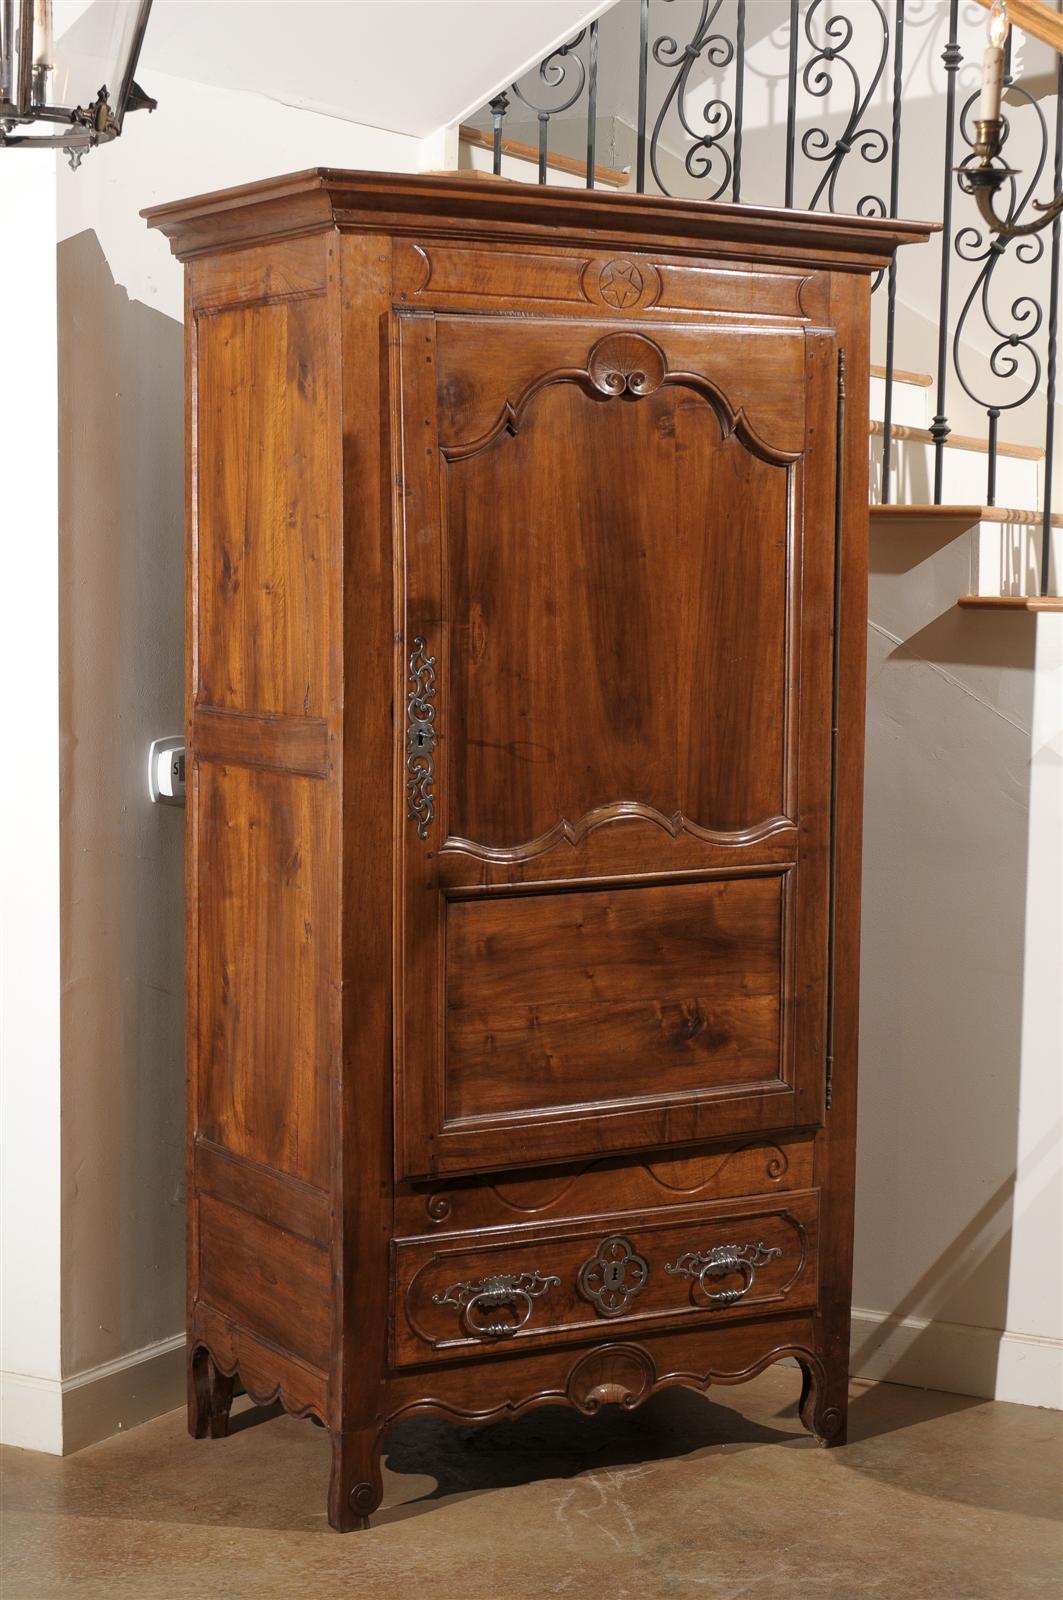 French 18th century walnut bonnetier with elegant carving, original hand-forged hardware and unusual lower drawer. Beautiful patina, circa 1790.